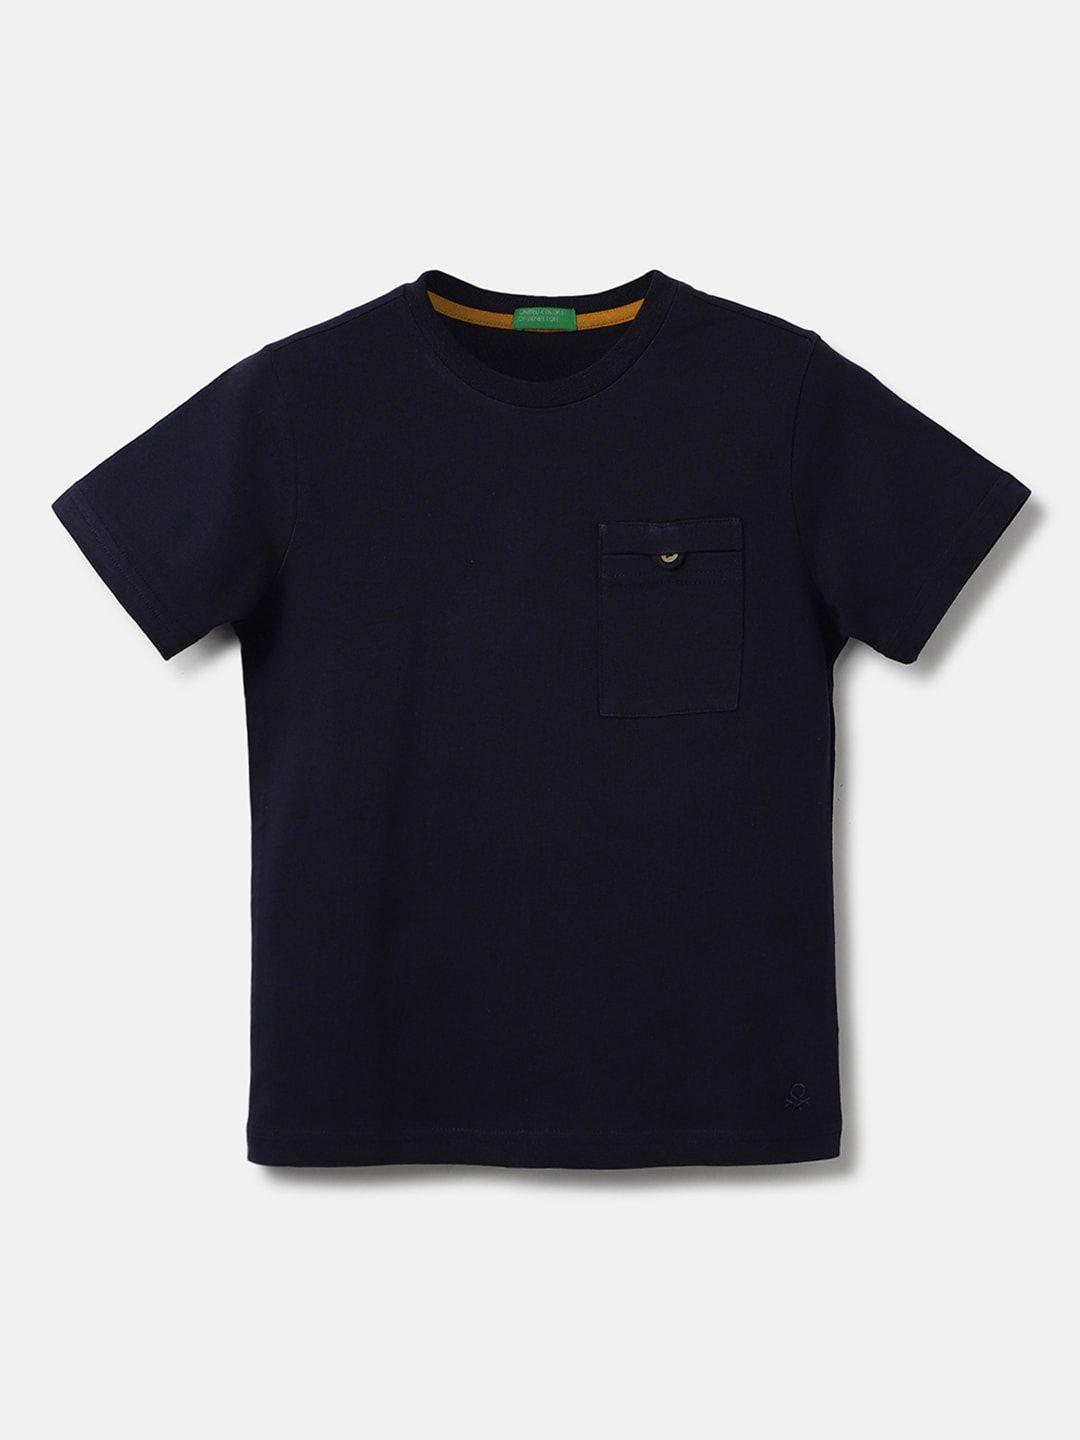 united colors of benetton boys round neck t-shirt